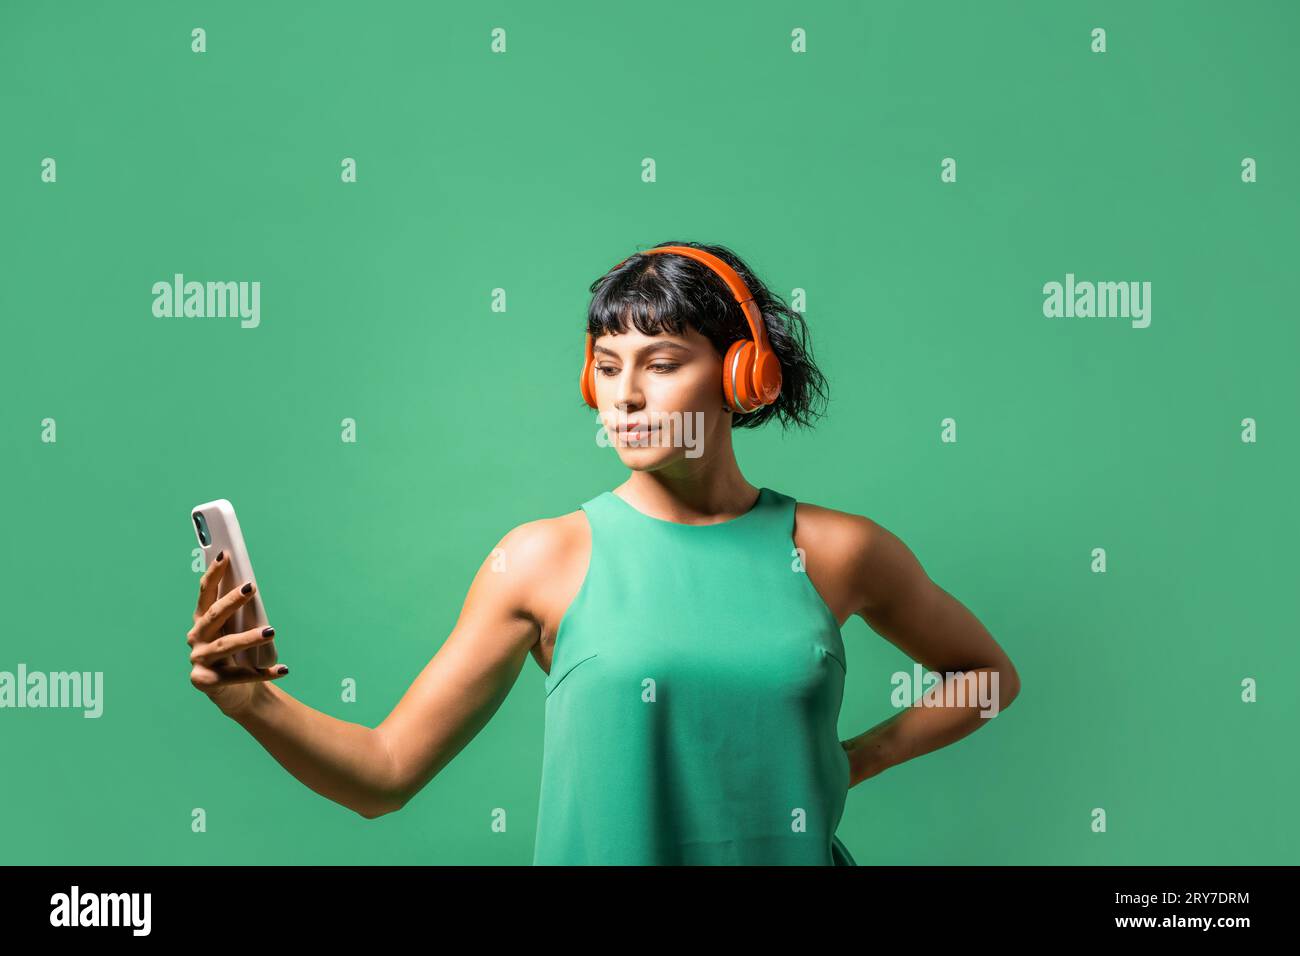 Portrait of a young woman enjoying music on her phone, wearing a red headphone and green tank top against a matching green background. Stock Photo